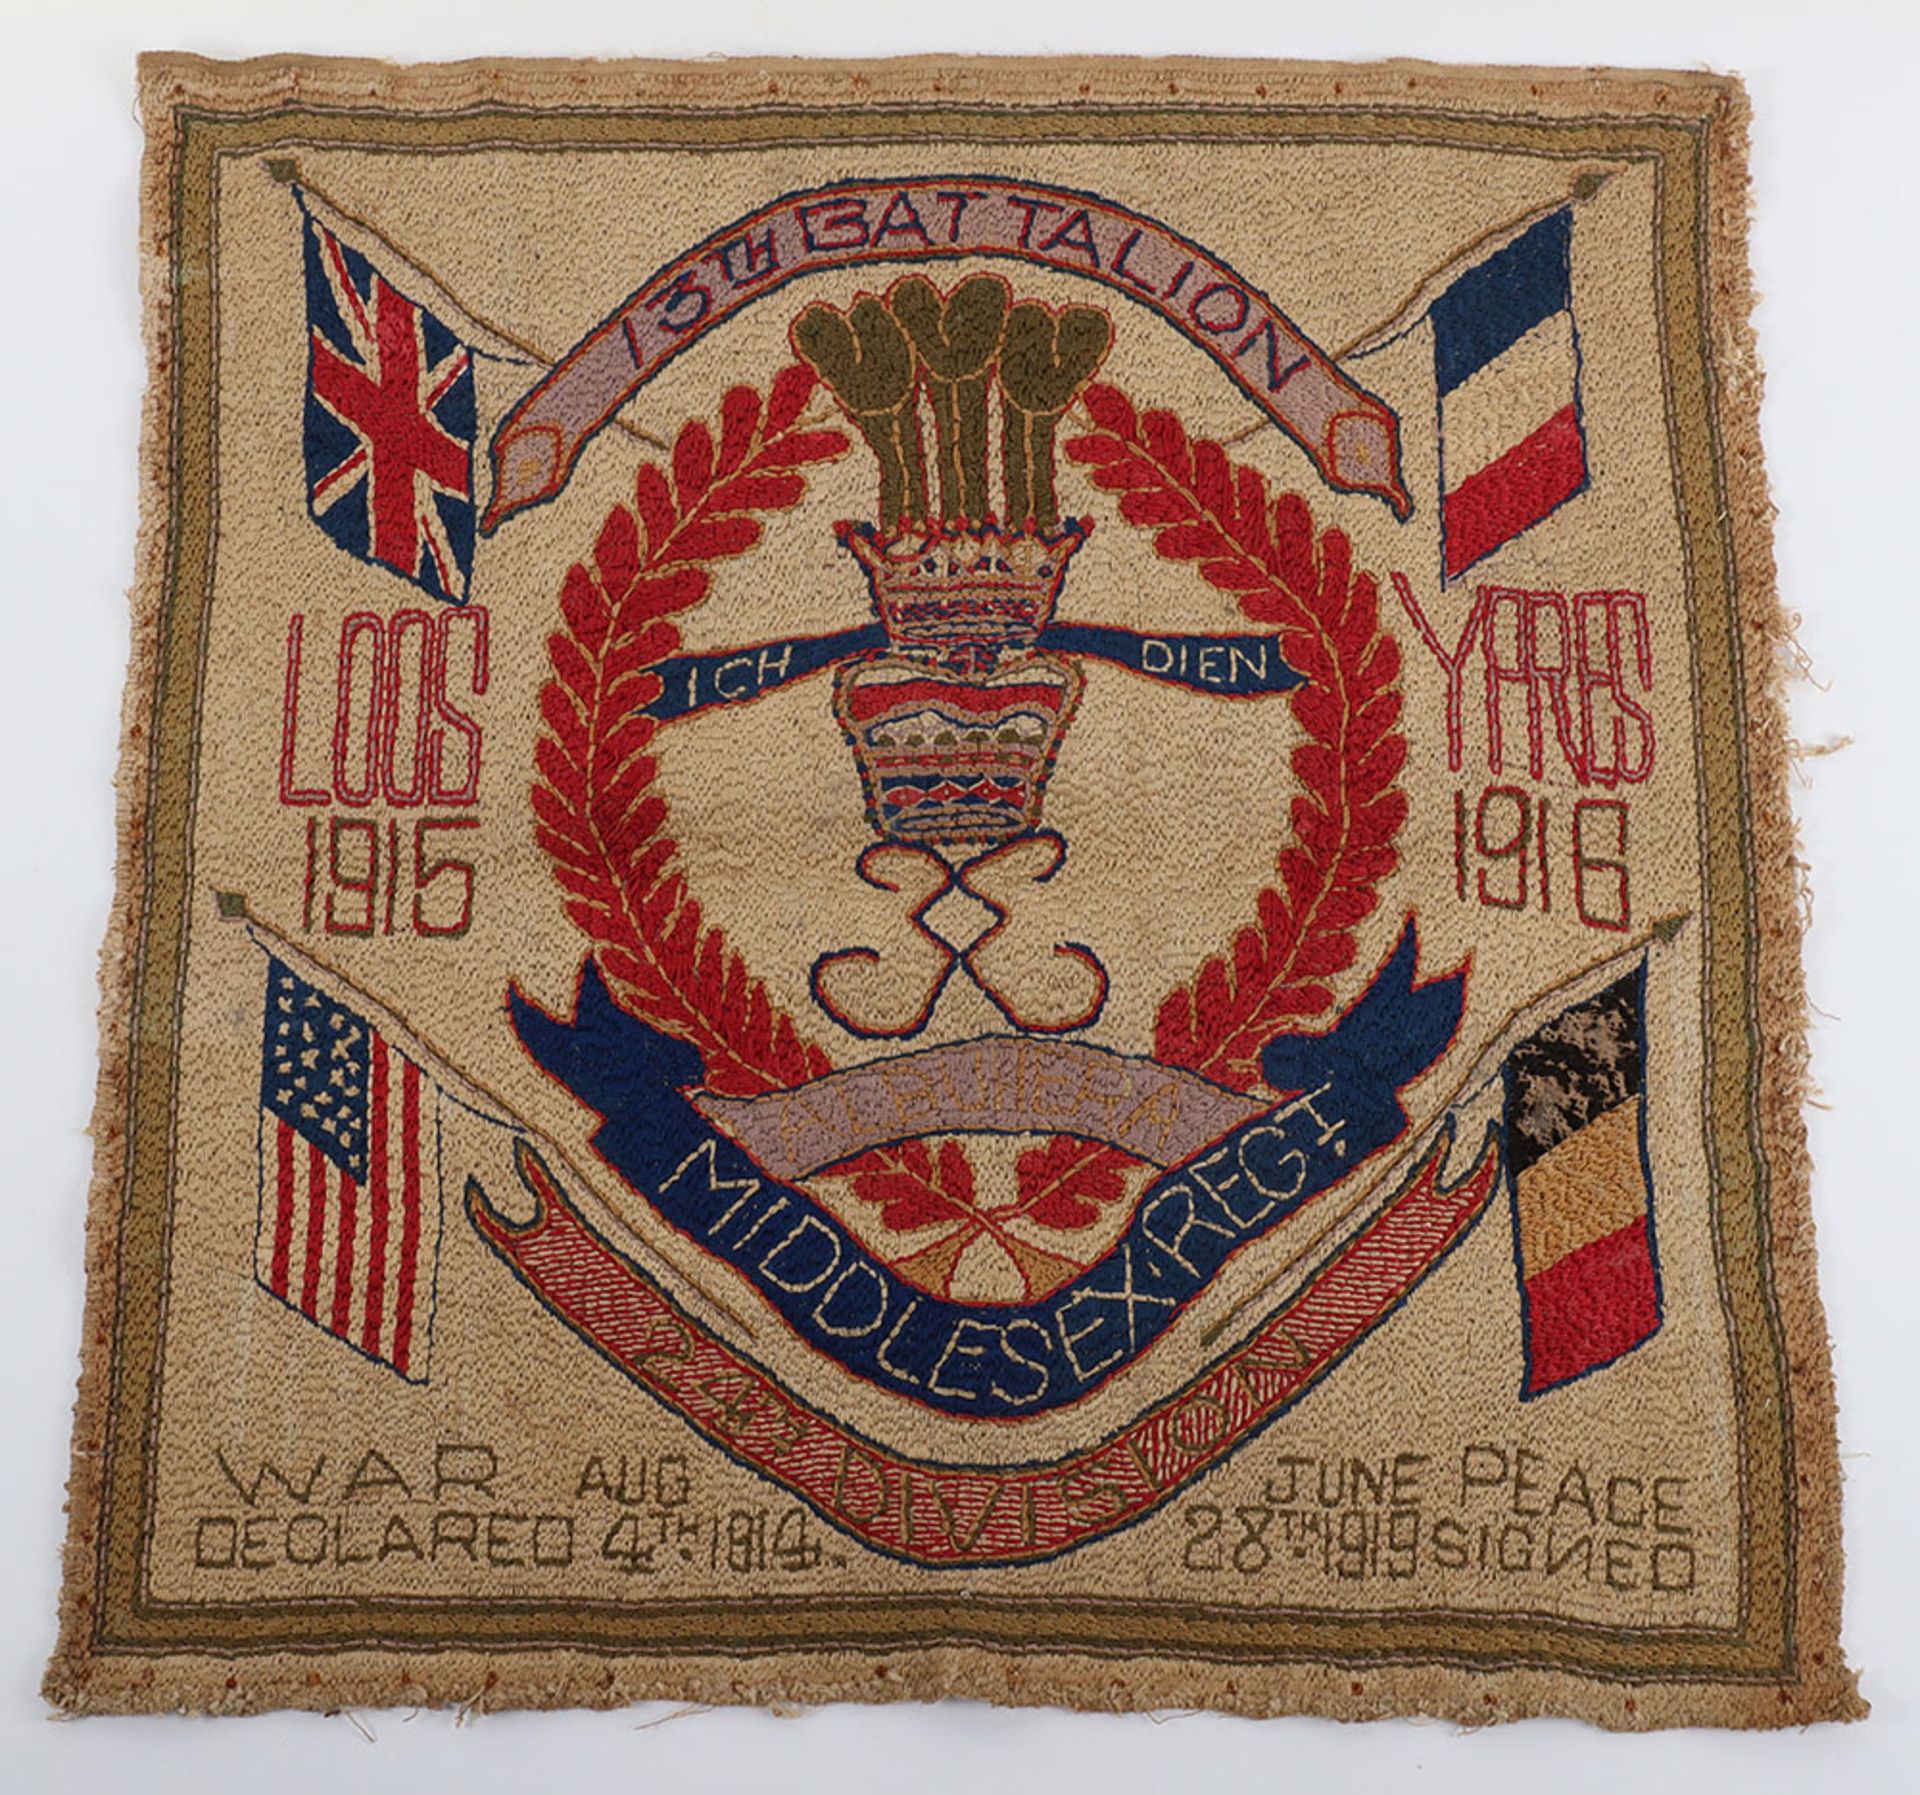 Great War Tapestry of 13th Battalion Middlesex Regiment Interest